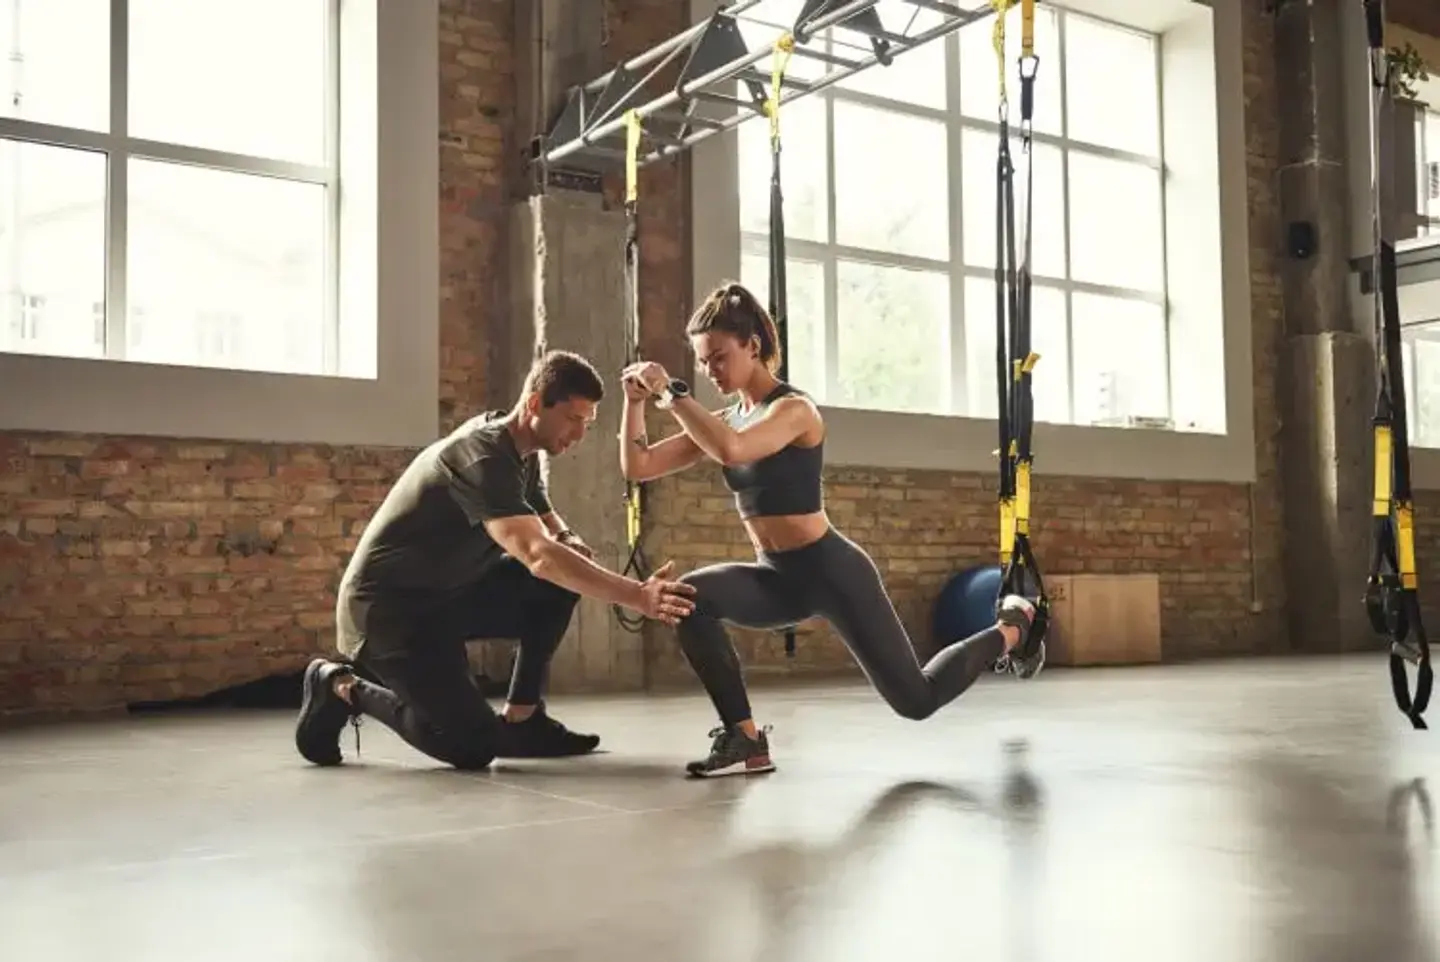 How to do squats with Trx fitness straps